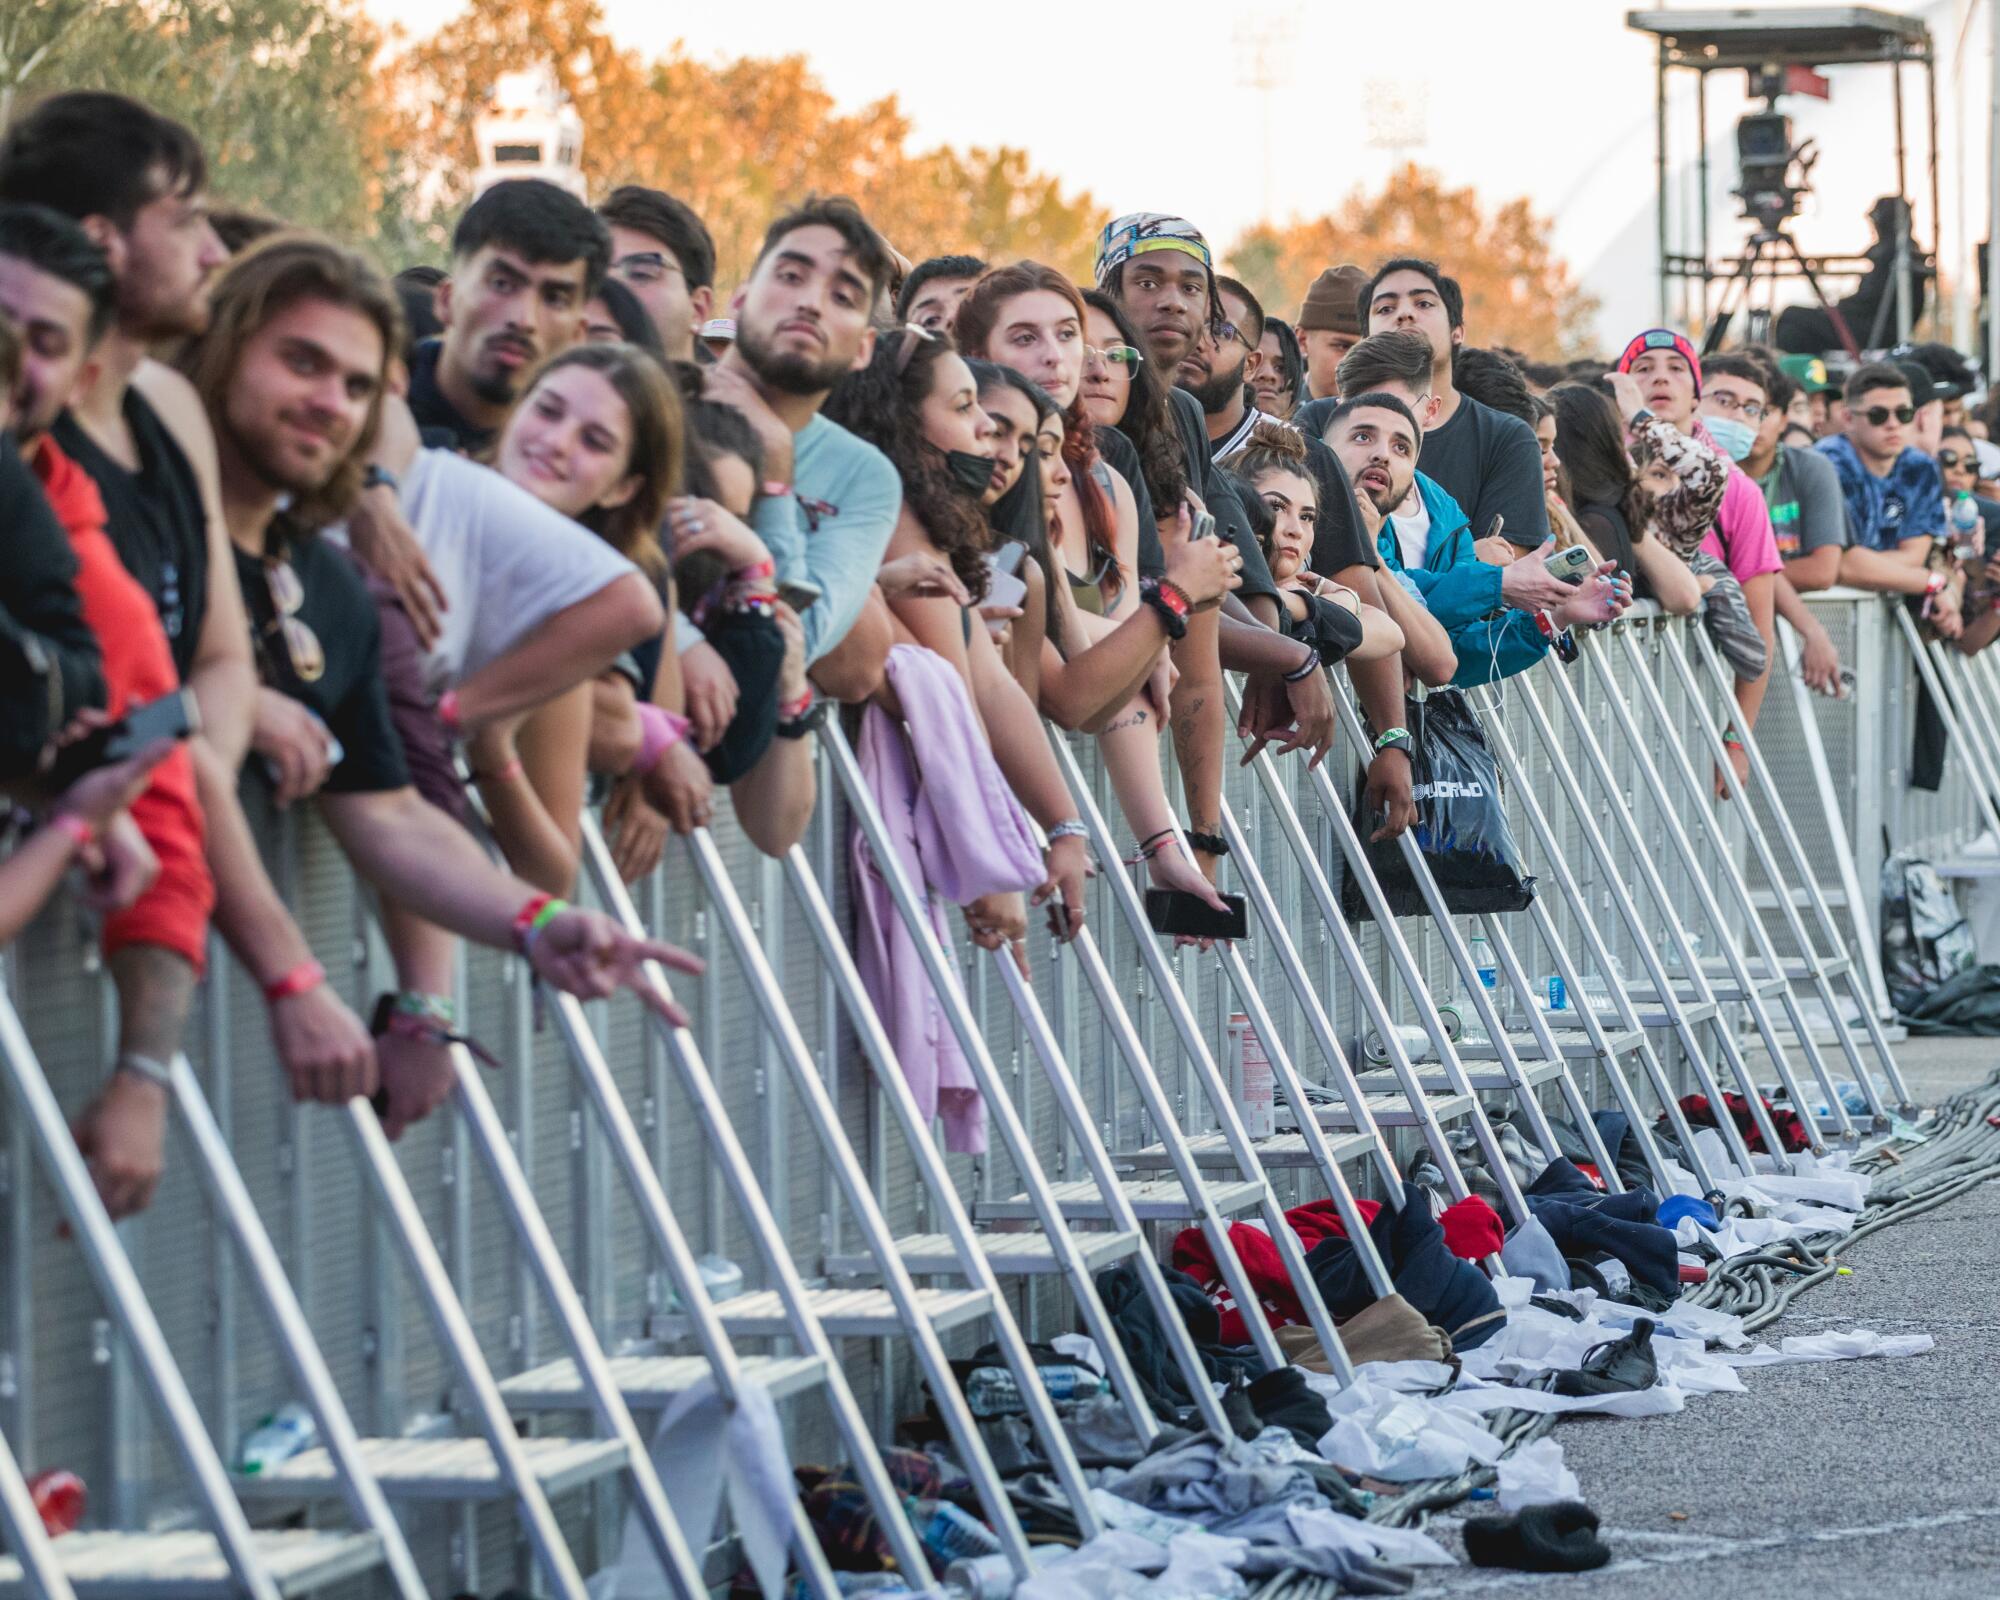 Music fans lean on barricades at the Astroworld Festival in Houston in November.